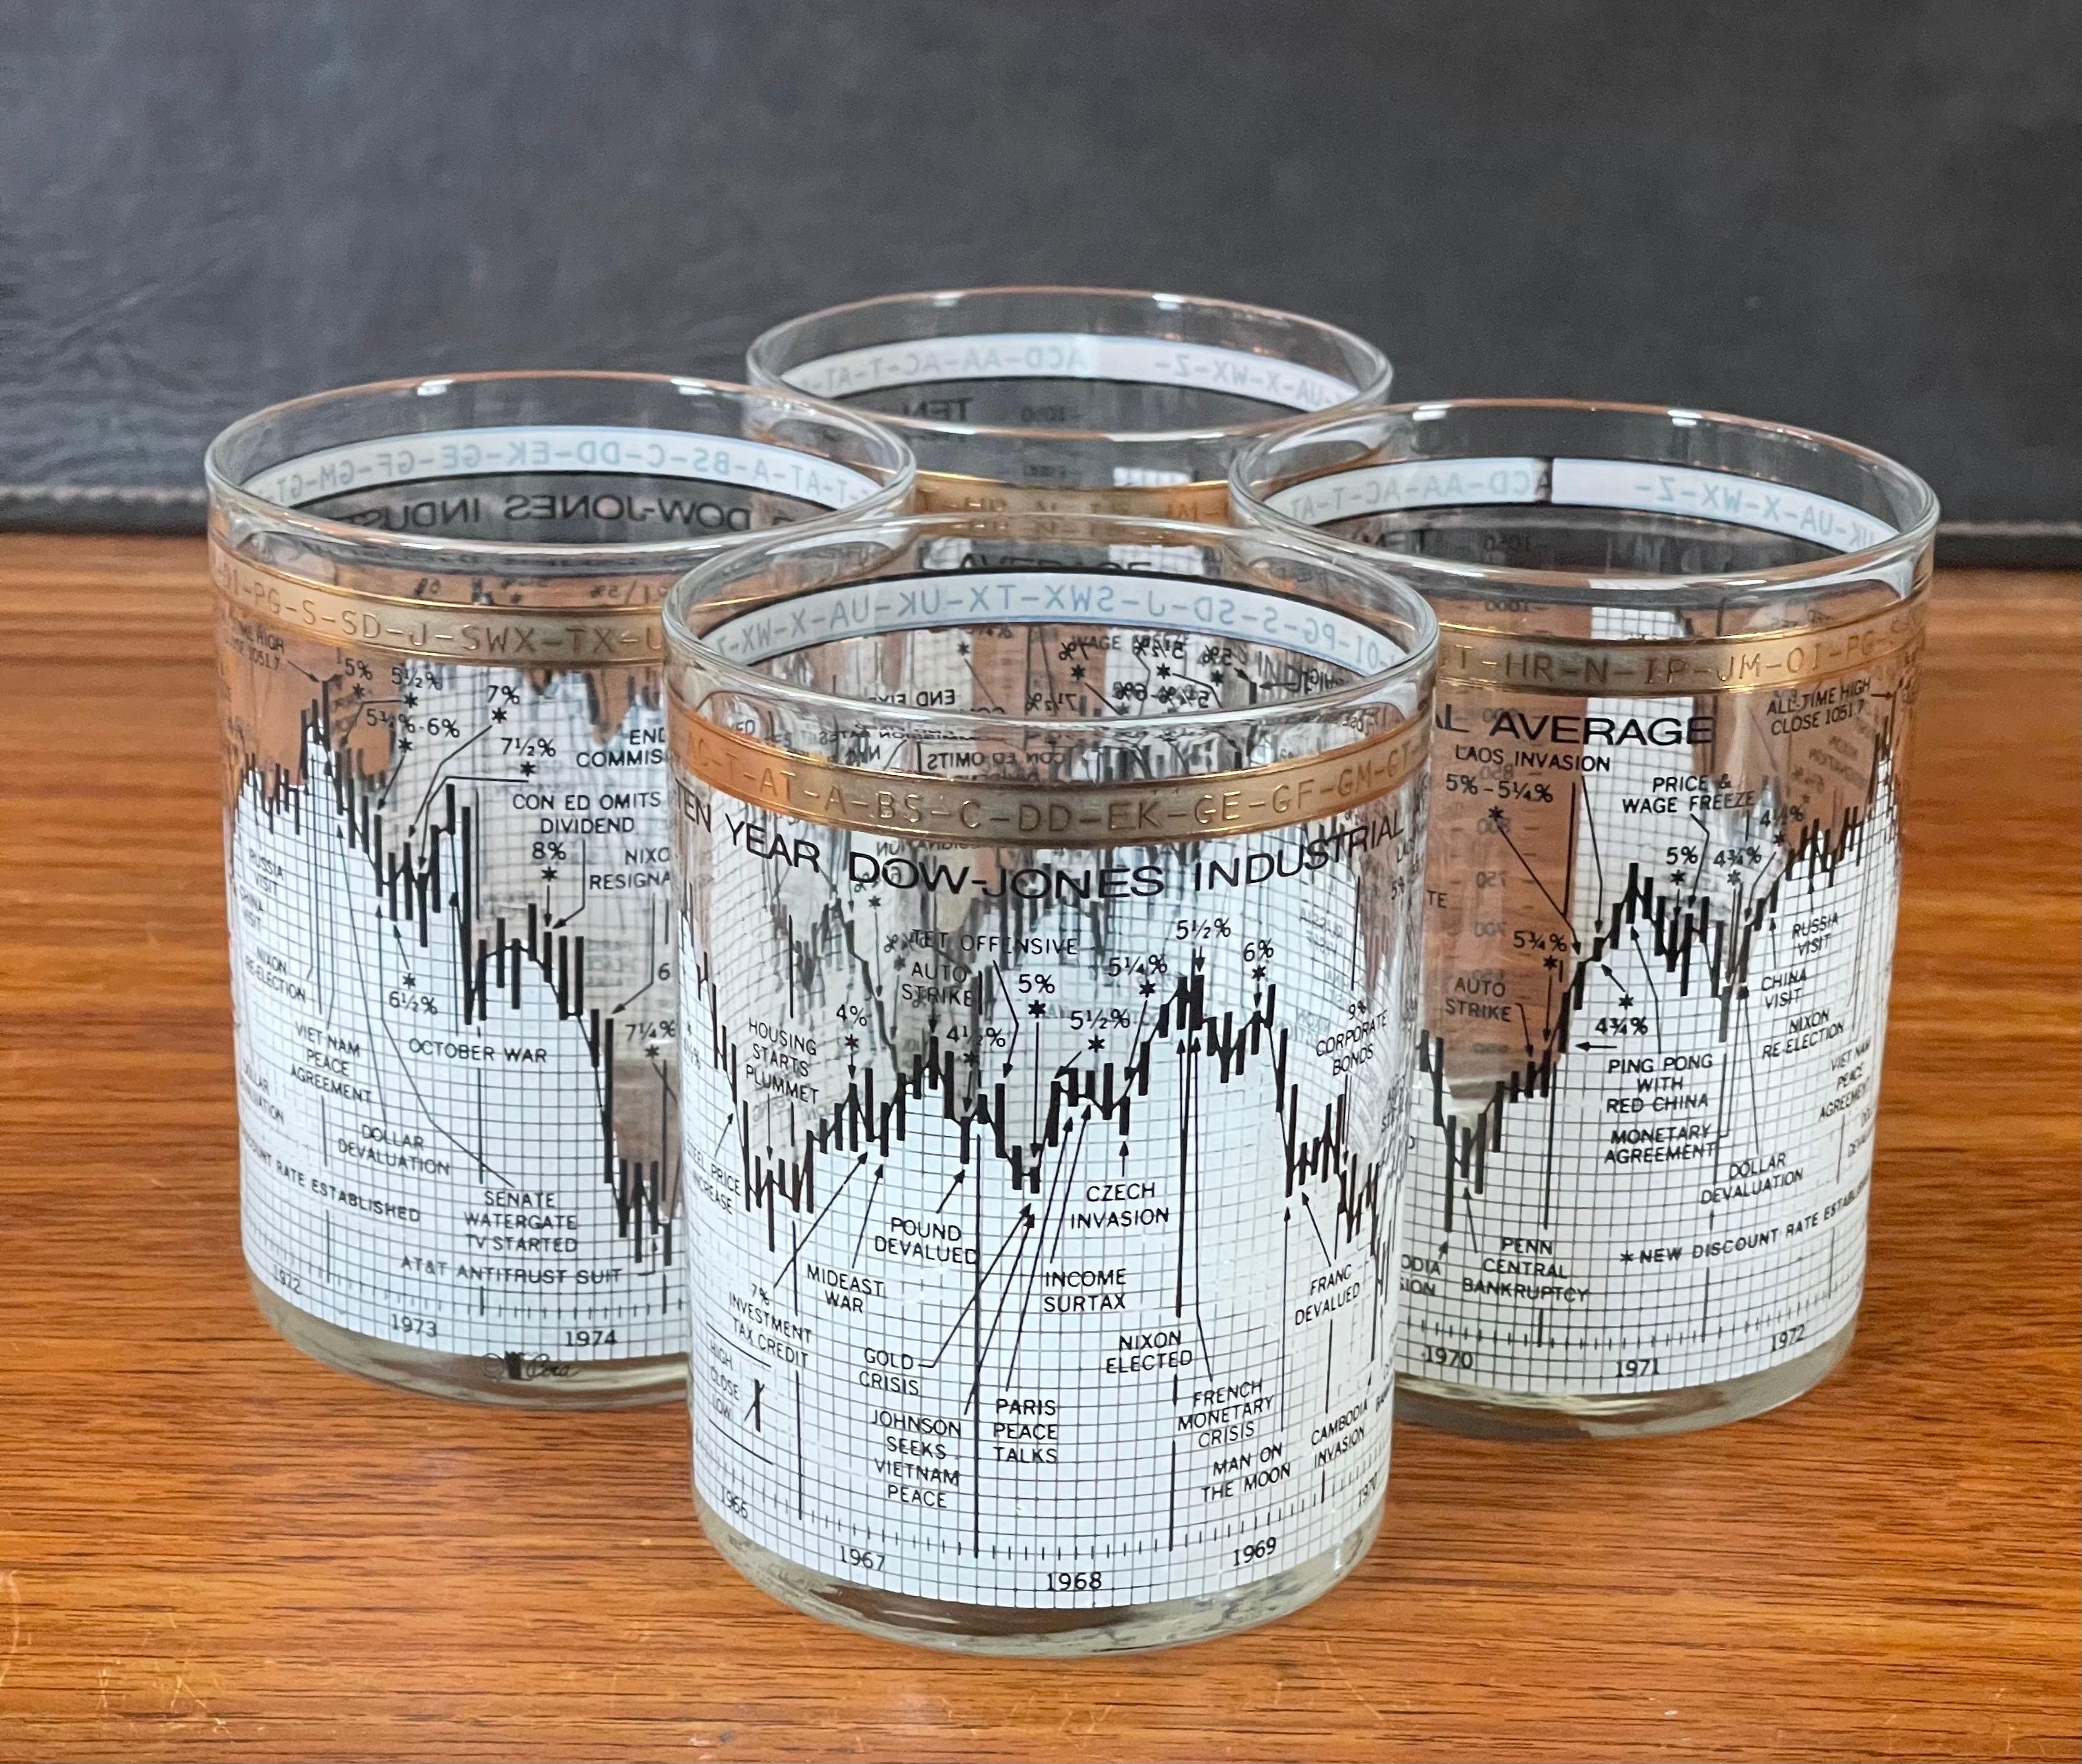 Great set of four double old fashioned glasses (14oz) tracking the Dow Jones Industrial Average (DJIA) from 1966 to 1976 by Cera. Each glass is the same and captures 10 years of current events and their impact on the stock market. The glasses are in